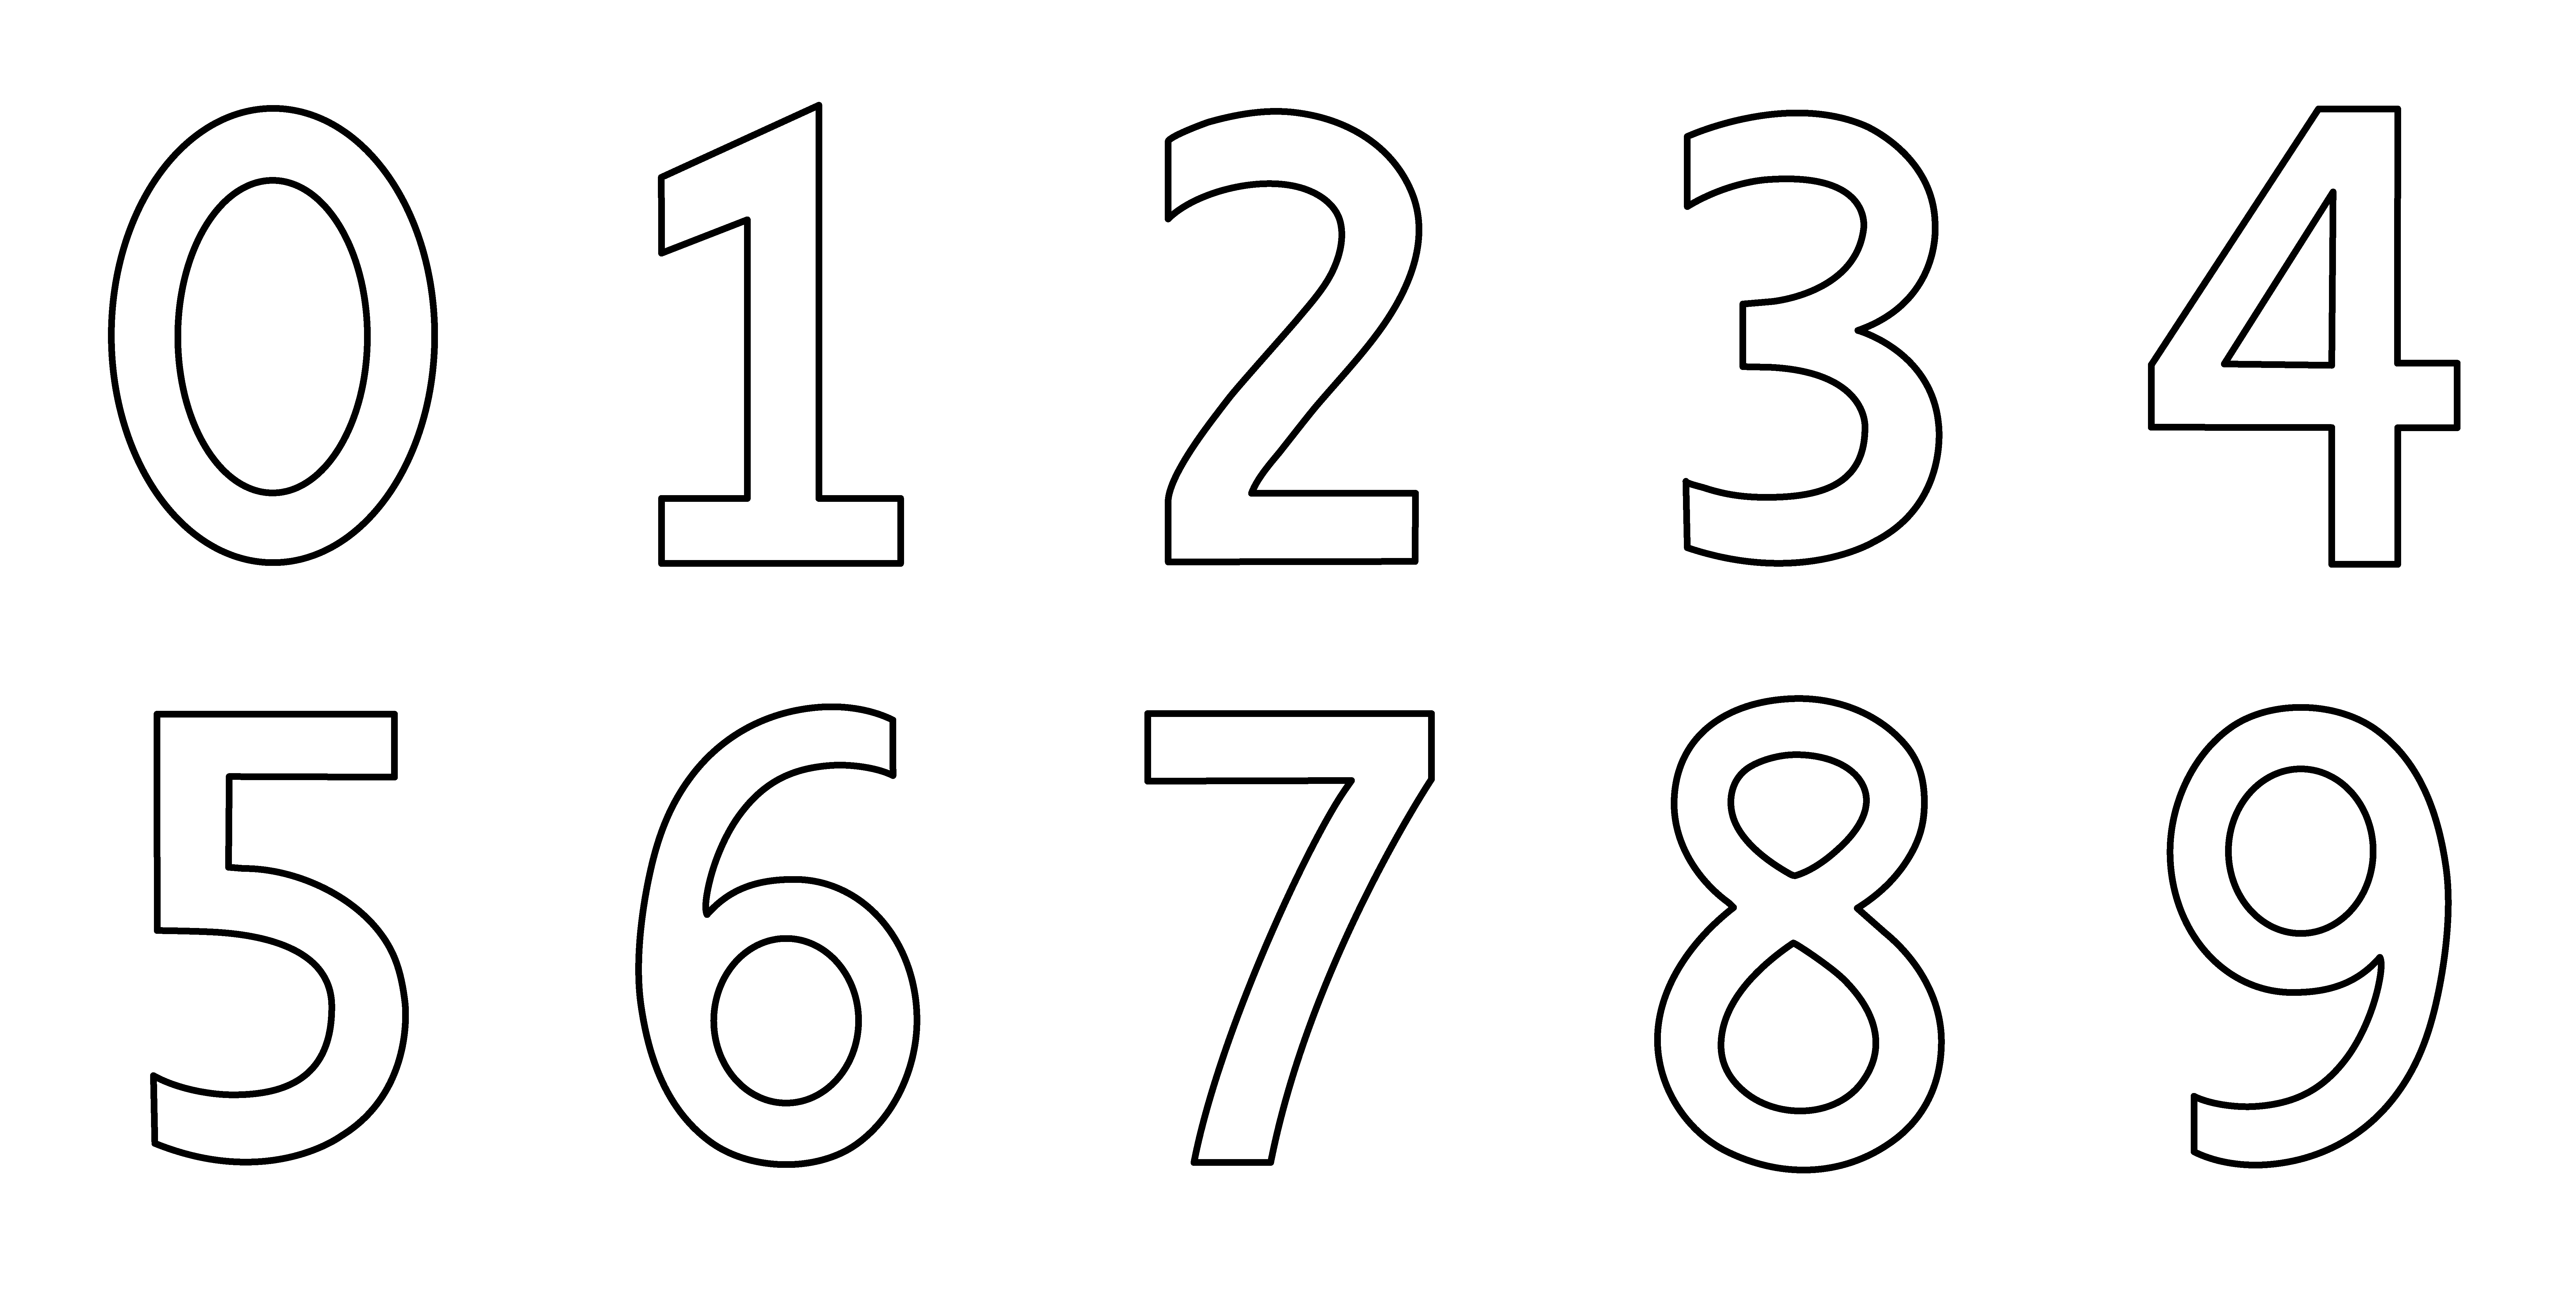 Black and white number clipart